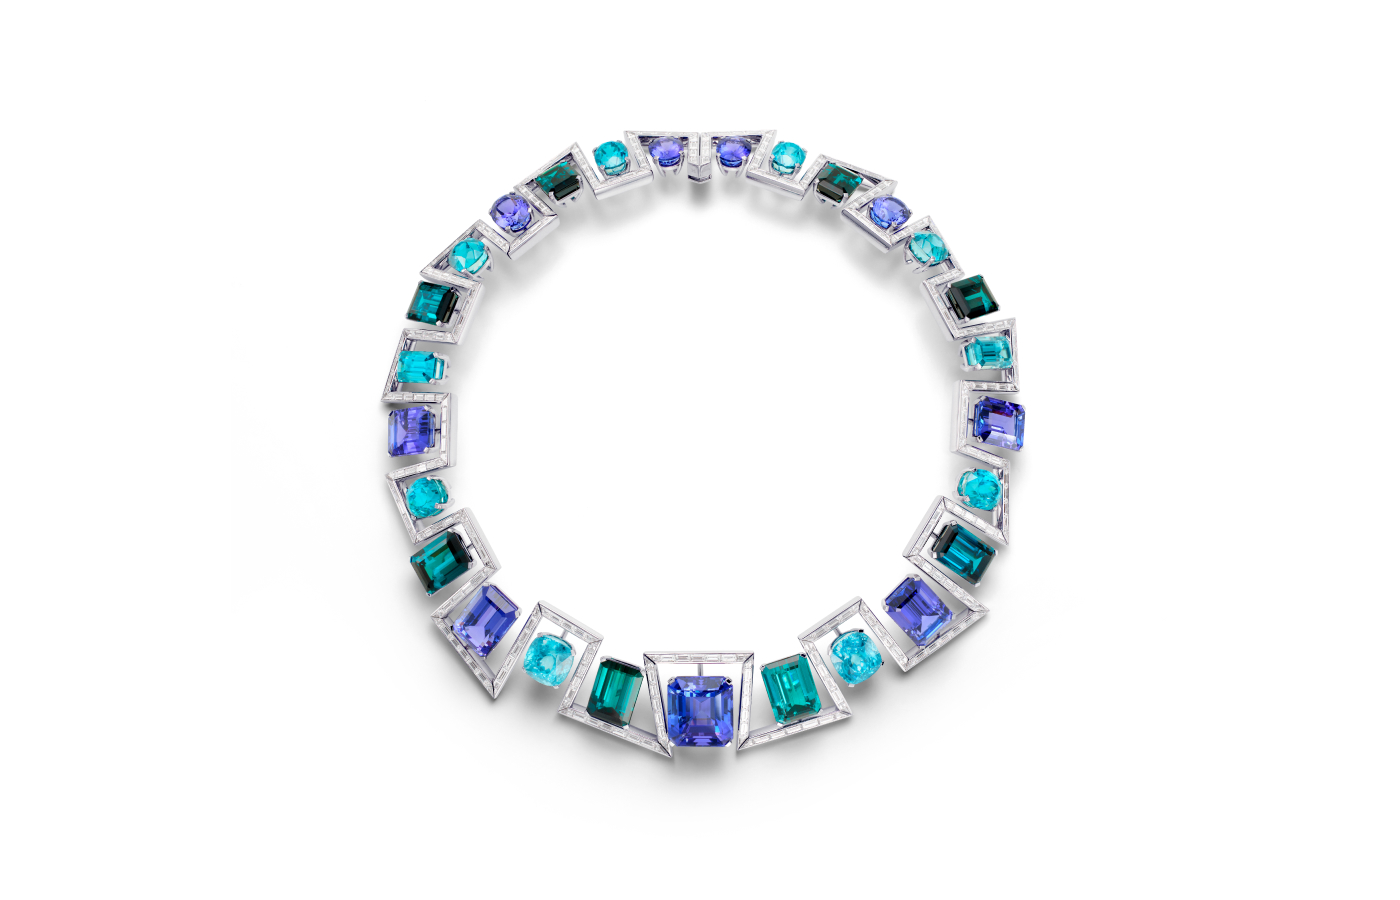 Bucherer Fine Jewellery necklace from the Manhattan High Jewellery collection with eight octagon-shaped indigolites, ten bright blue zircons, nine violet-blue tanzanites, and 300 baguette-cut diamonds in 18k white gold 